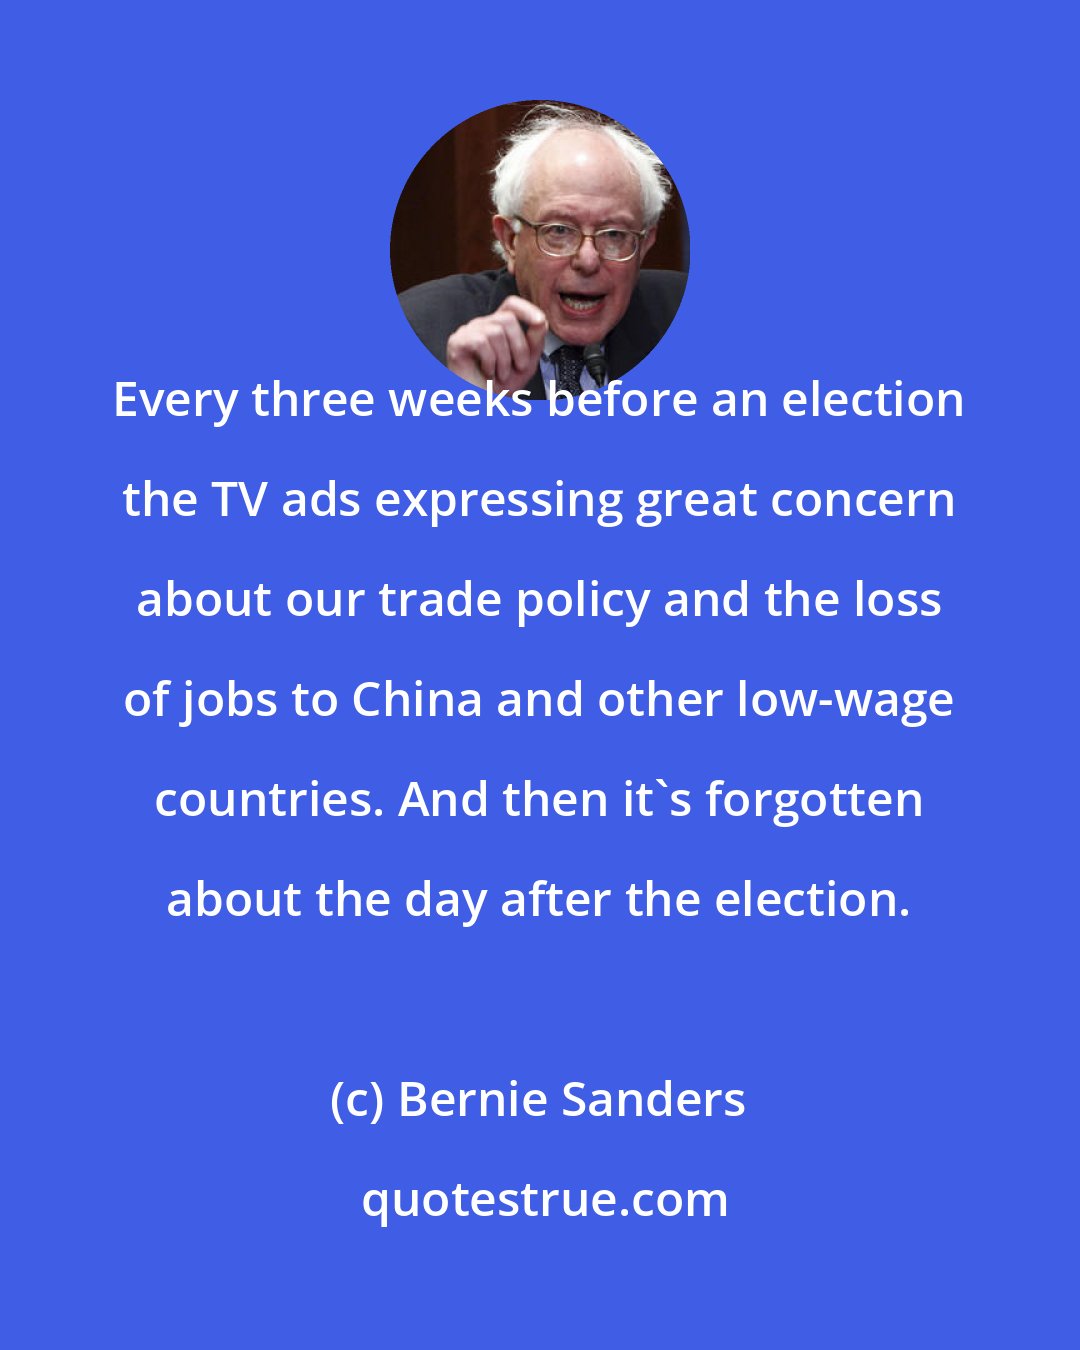 Bernie Sanders: Every three weeks before an election the TV ads expressing great concern about our trade policy and the loss of jobs to China and other low-wage countries. And then it's forgotten about the day after the election.